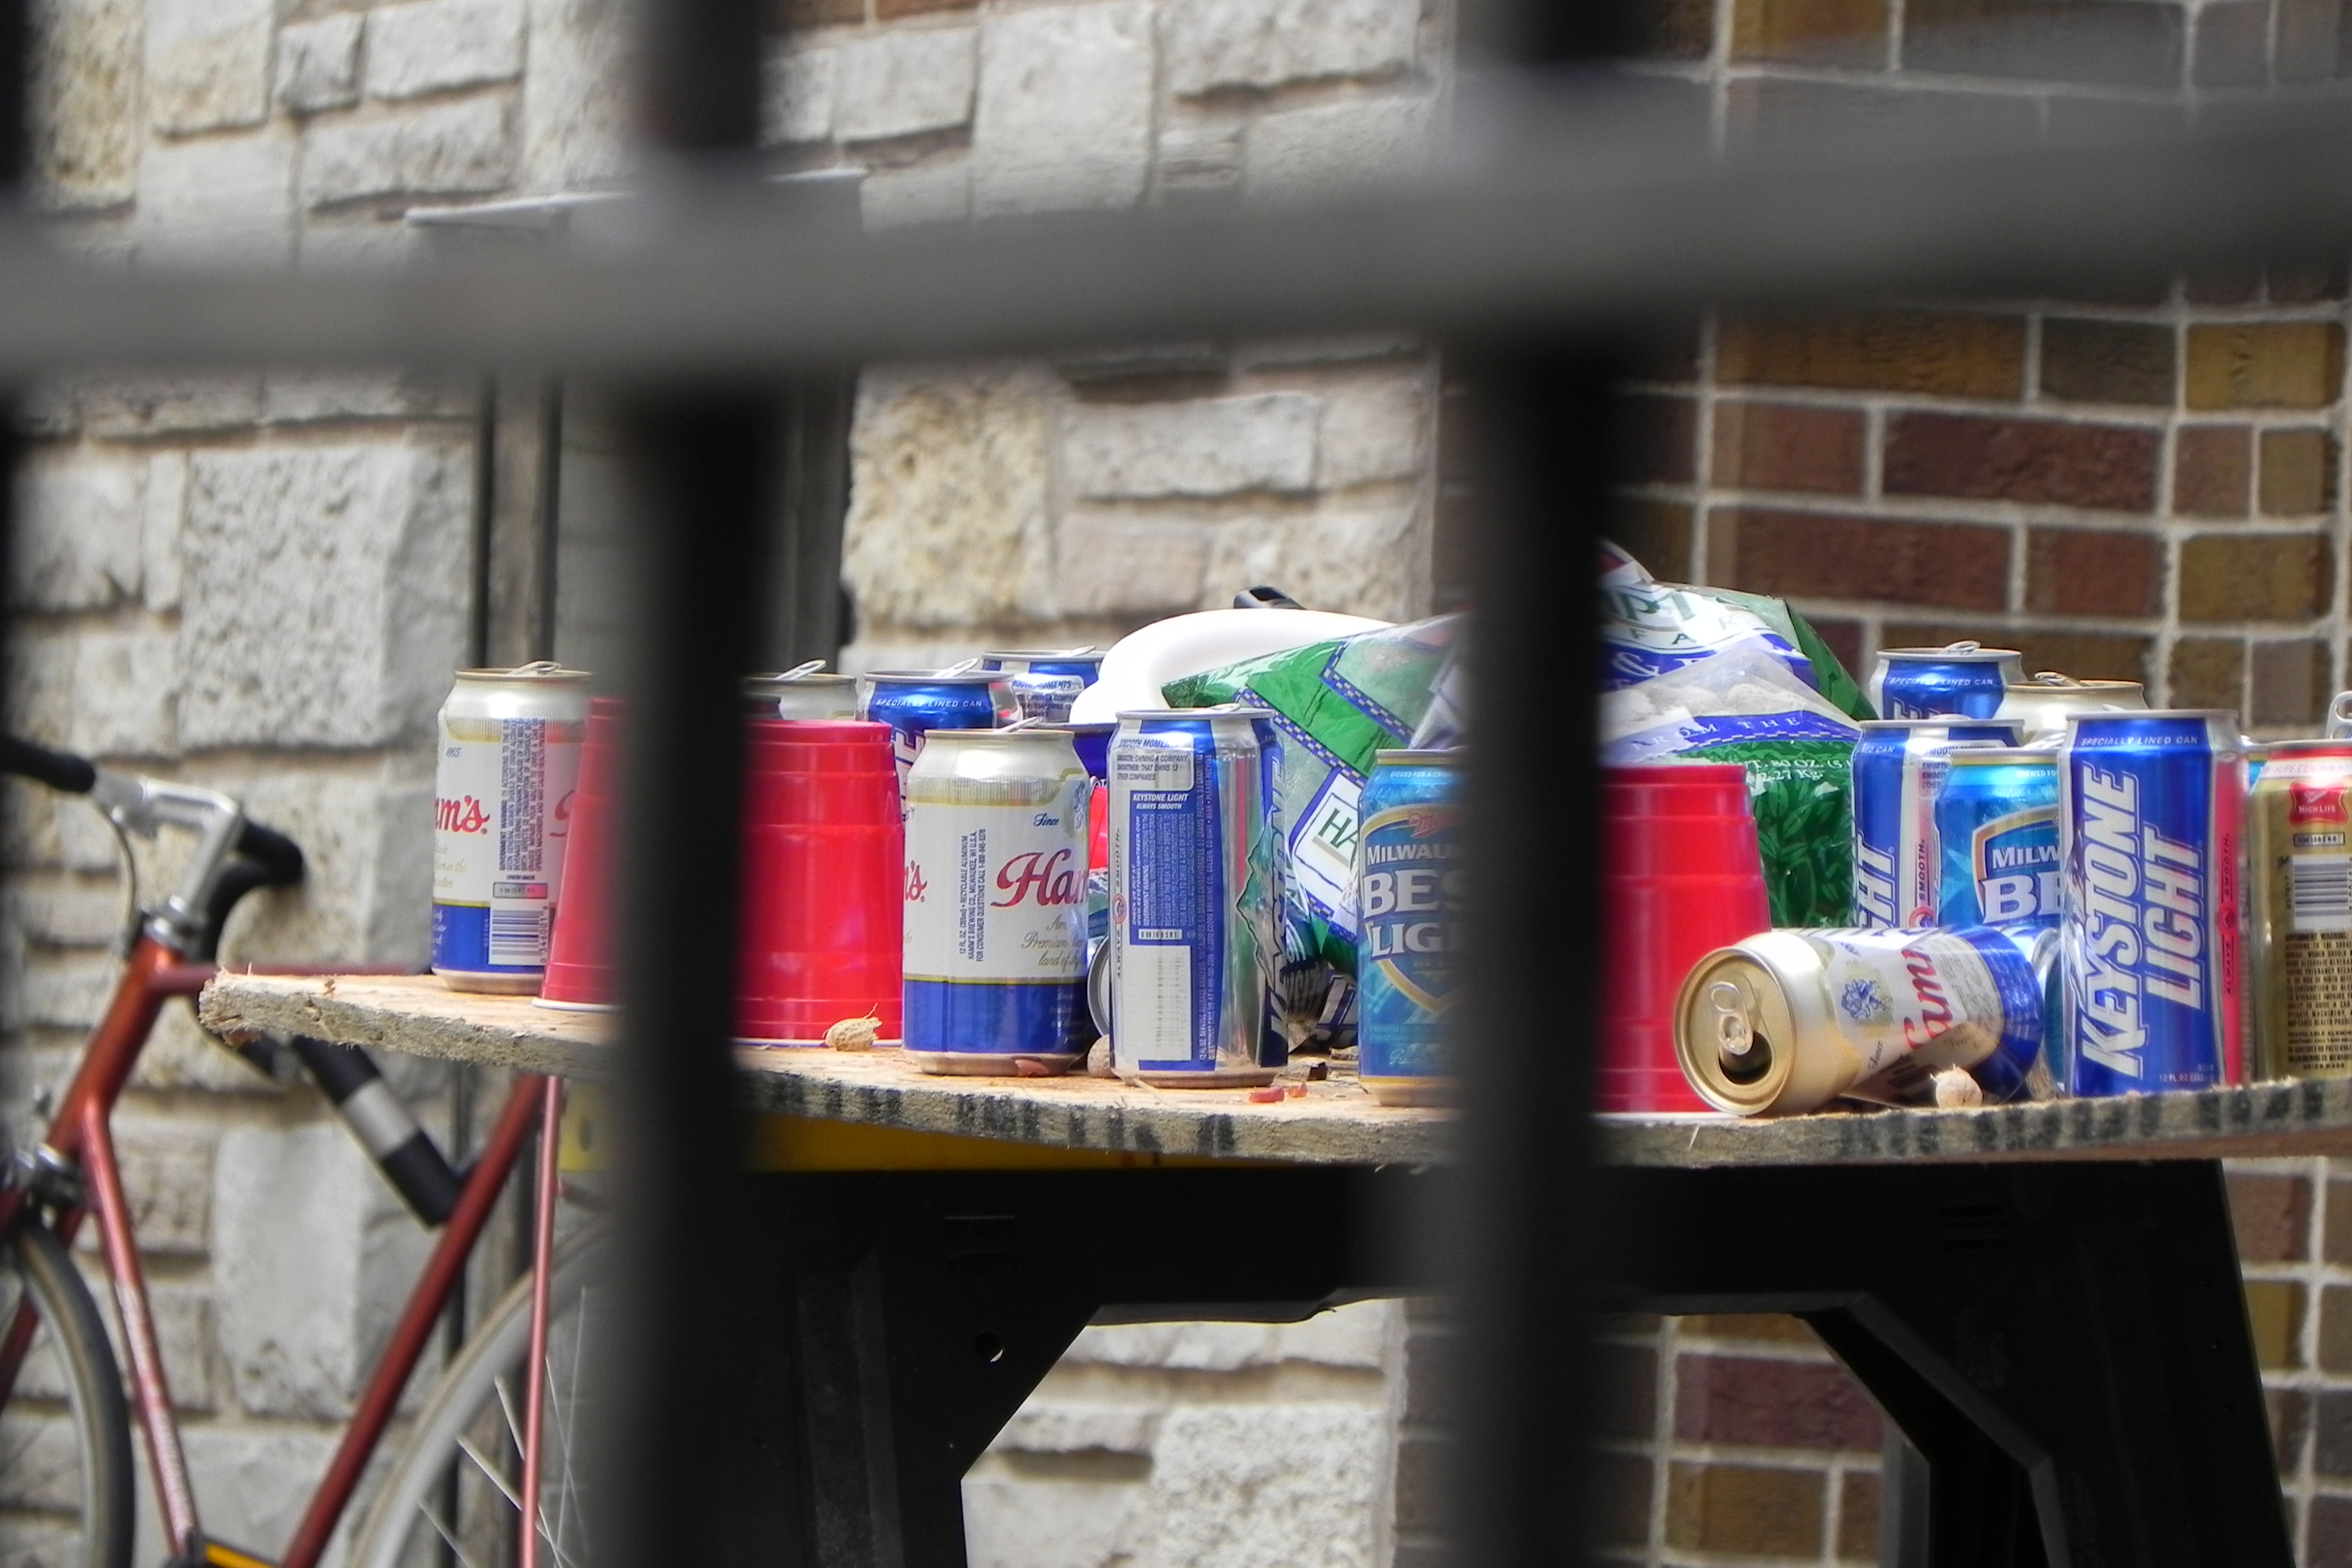 Empty beer cans cover a makeshift table in Madison on a football Saturday in 2010. Photo by Richard Hurd (CC BY 2.0)